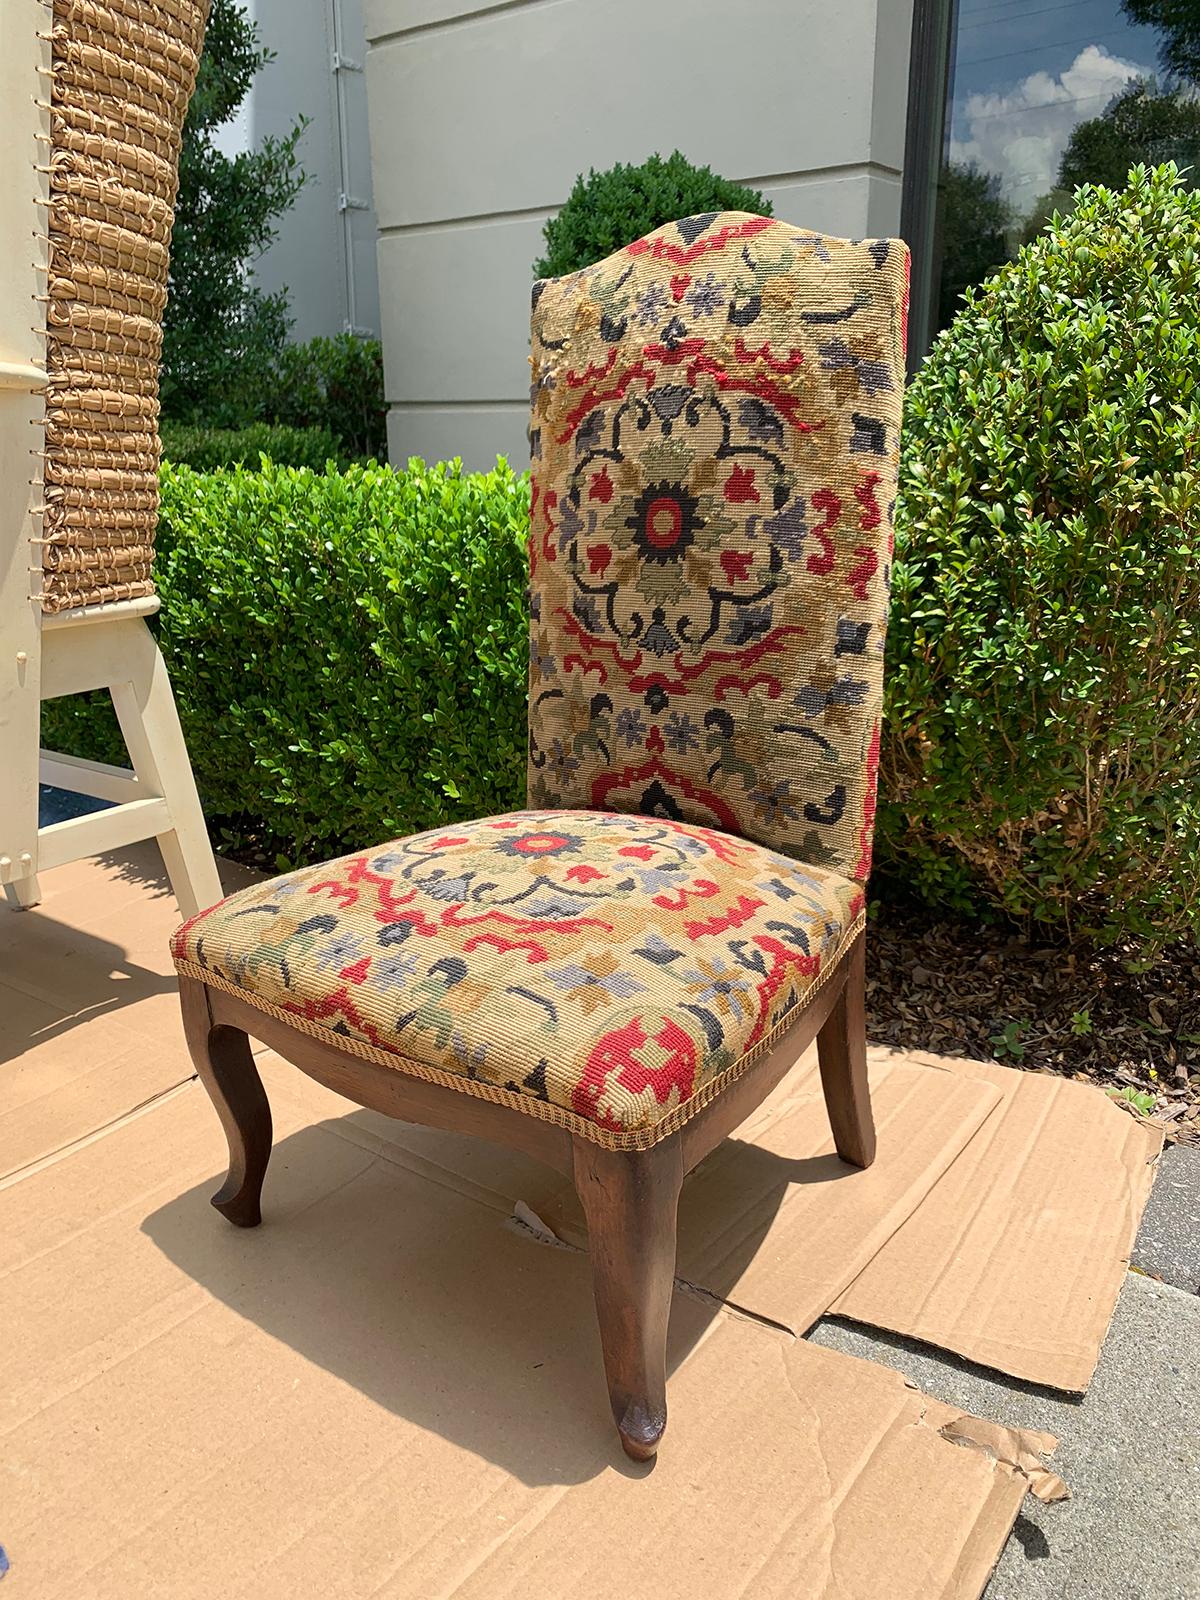 18th-19th century French walnut and needlepoint child's chair
Measures: 16.75